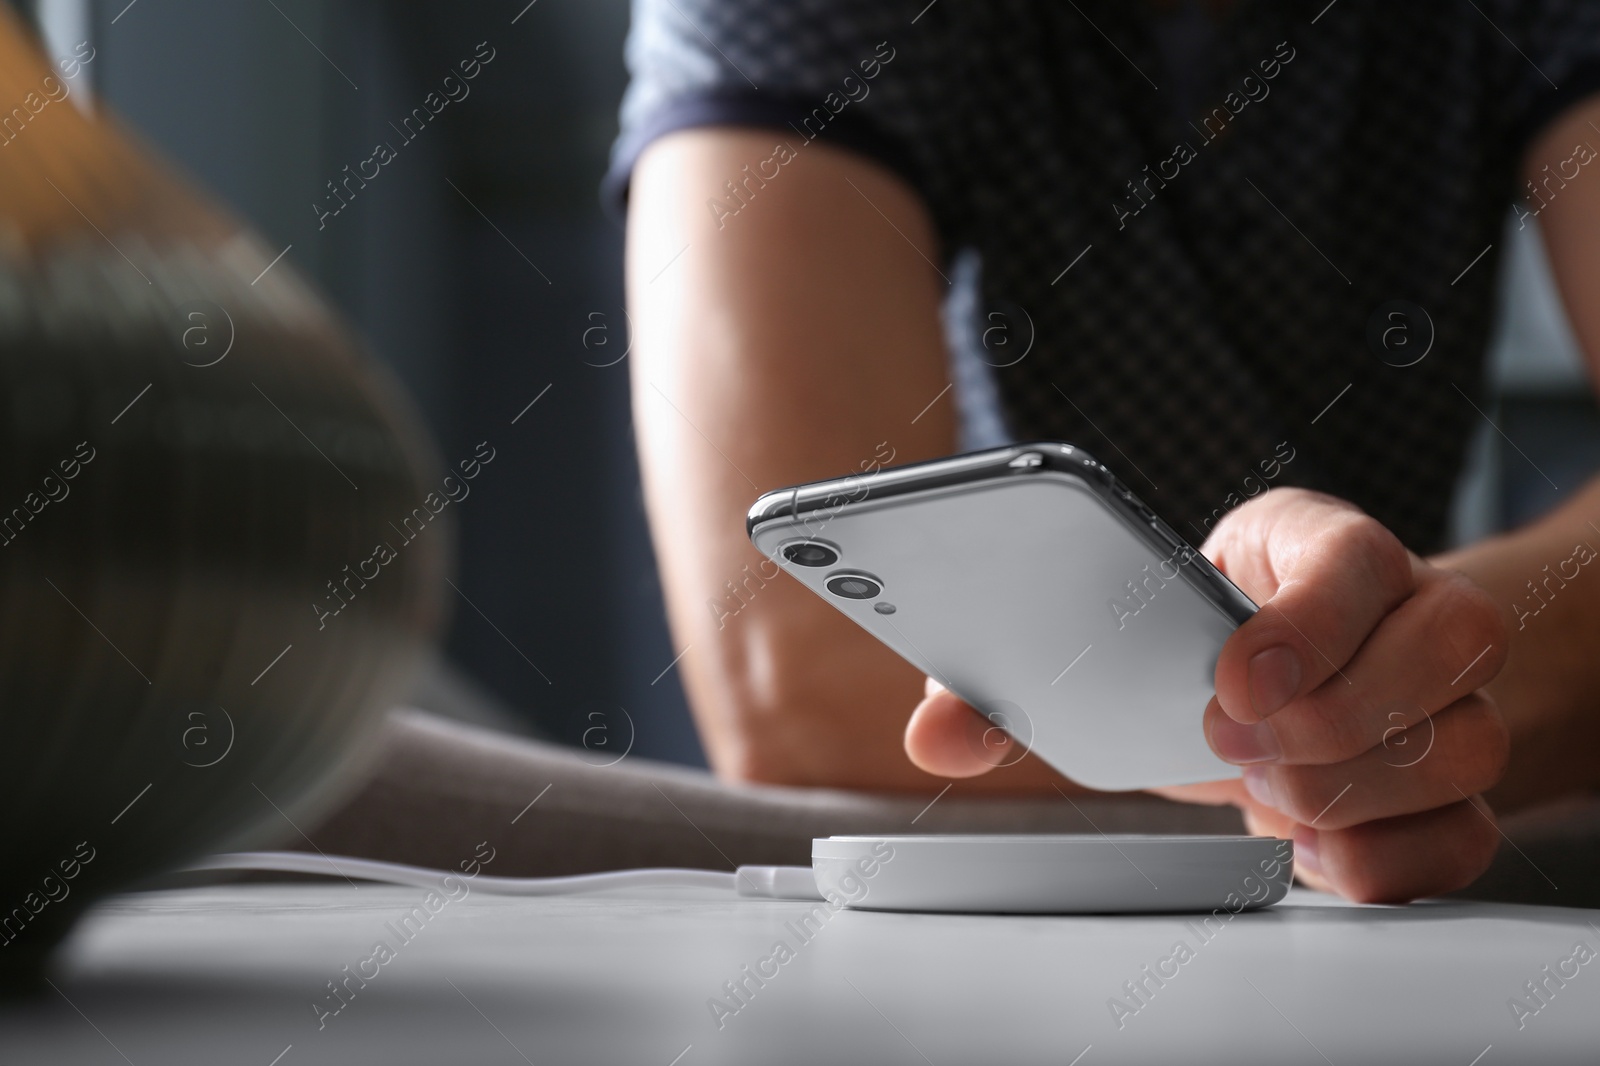 Photo of Man putting smartphone on wireless charger in room, closeup